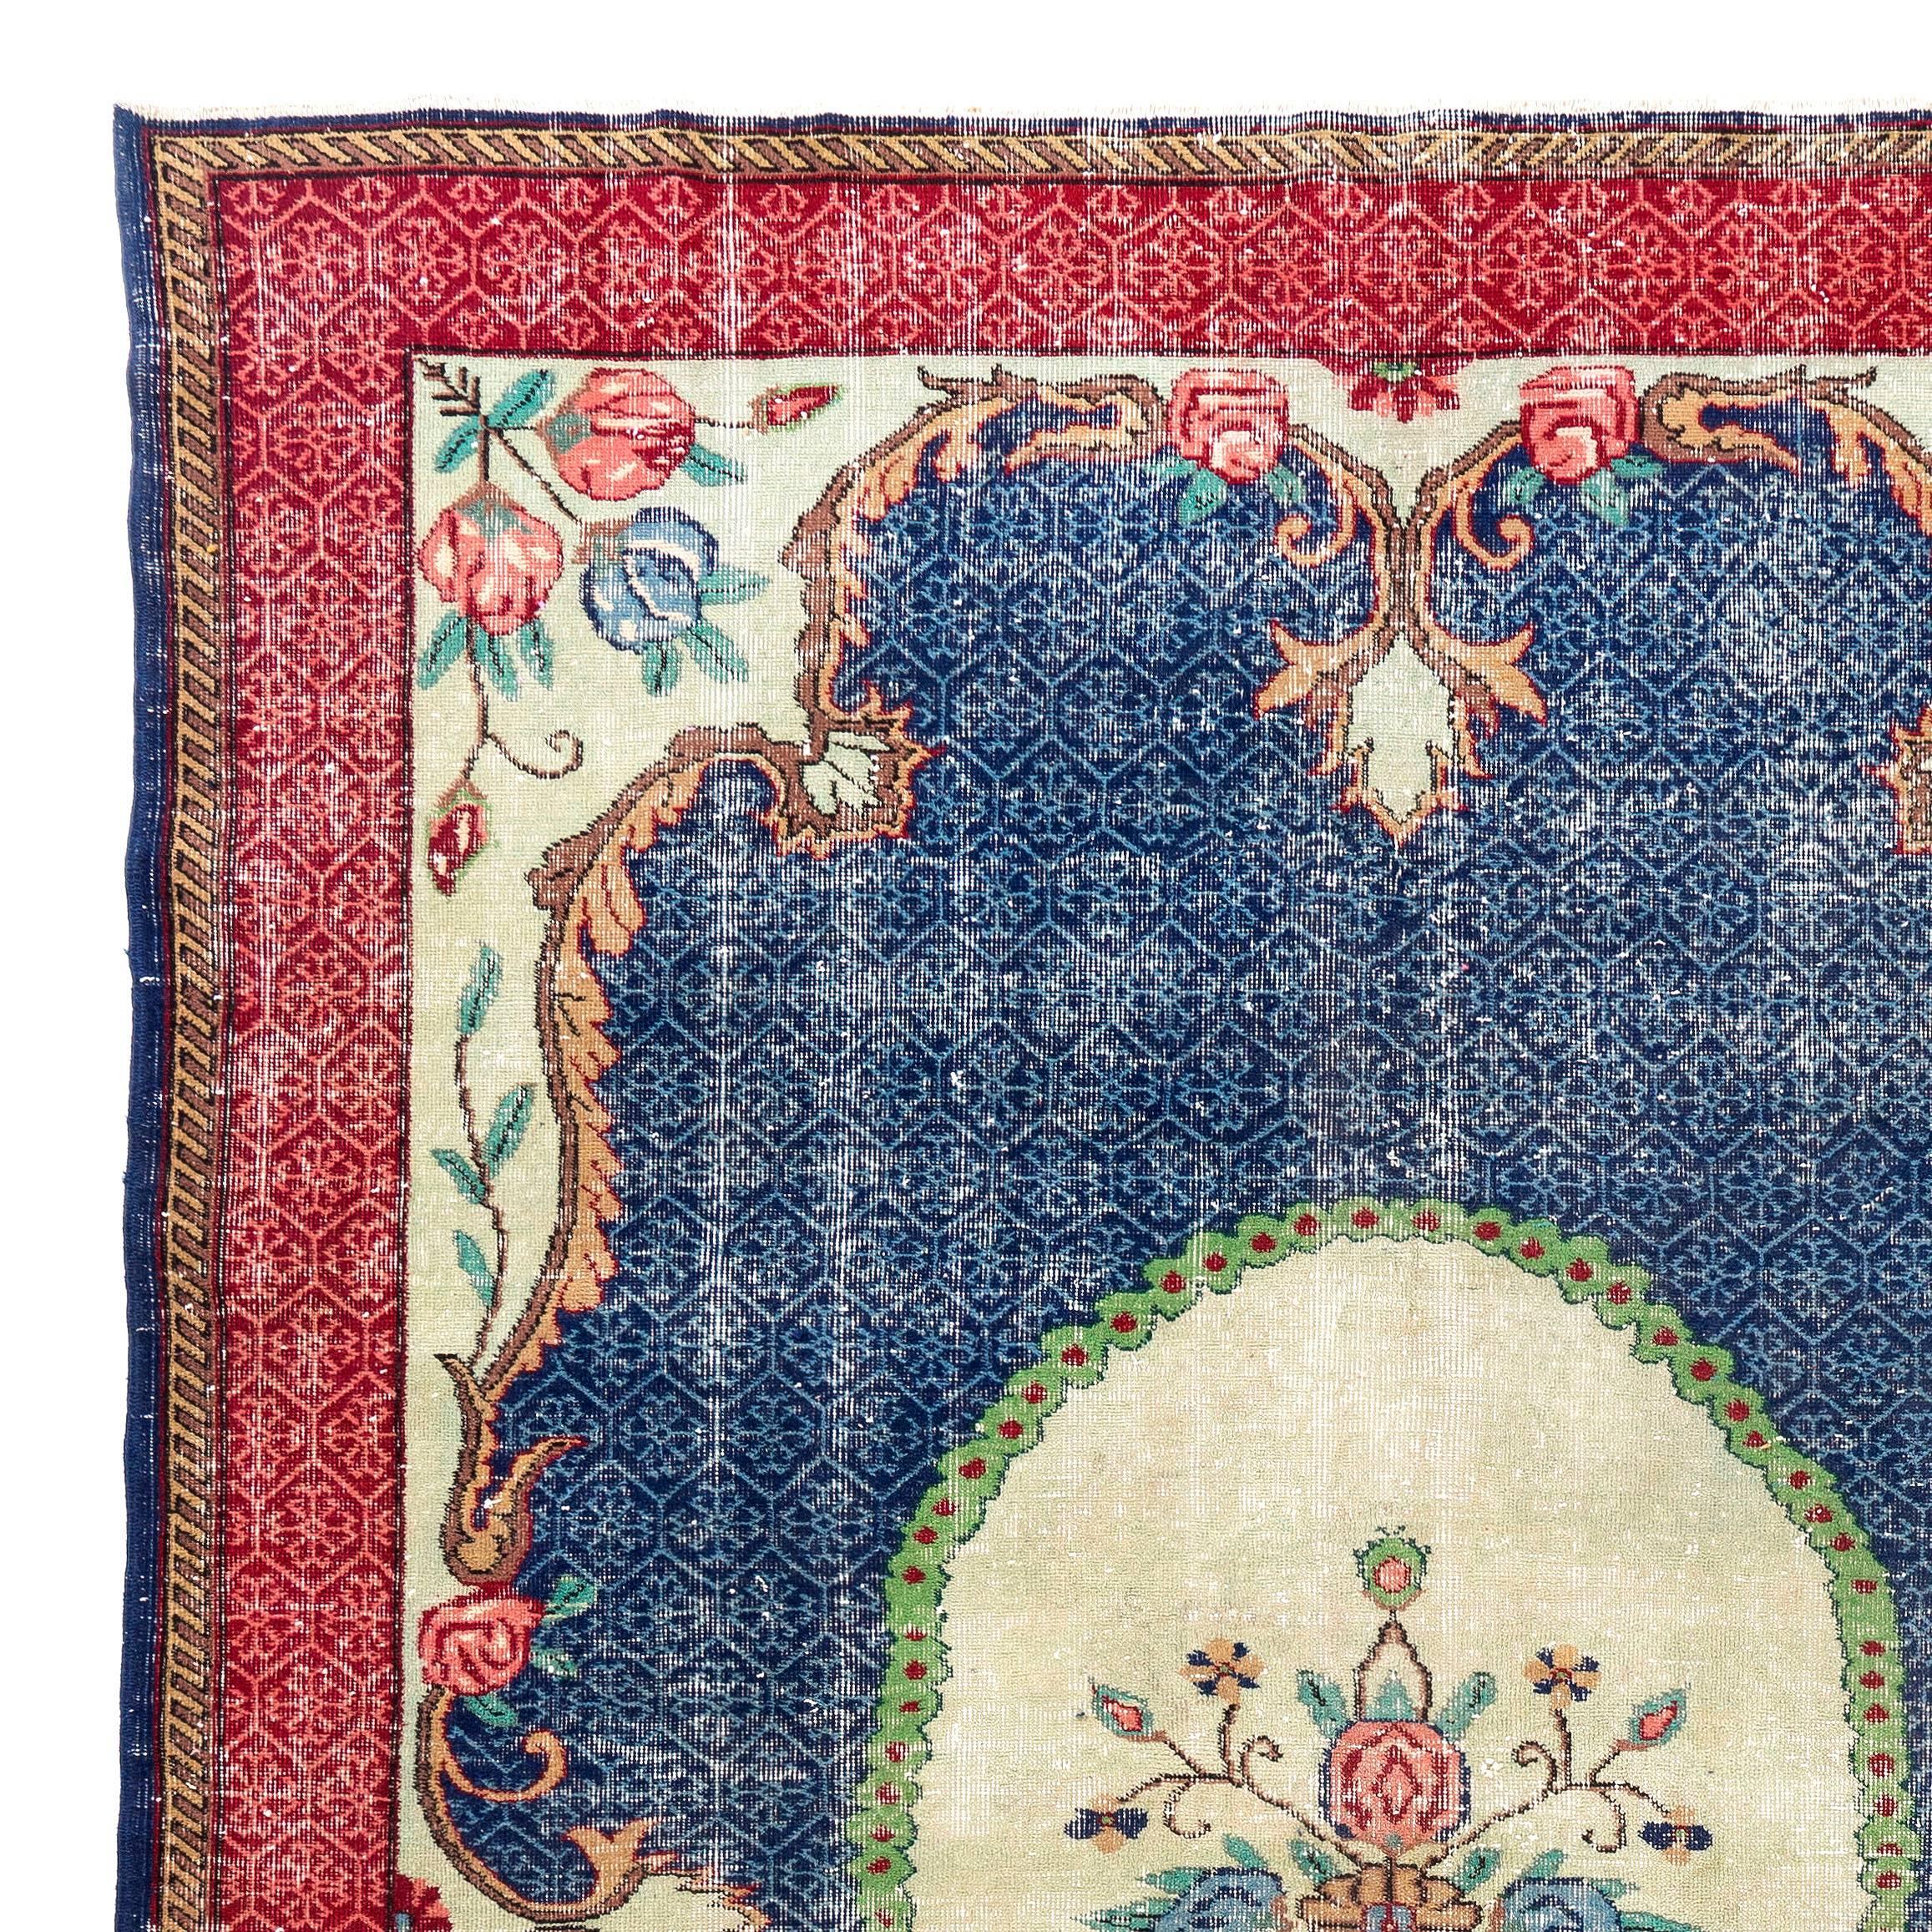 A hand-knotted vintage Turkish rug made of distressed low wool pile on finely woven cotton foundation featuring a pared down French Savonnarie style design in red, blue and cream. In very good condition. Sturdy and as clean as a brand new rug,